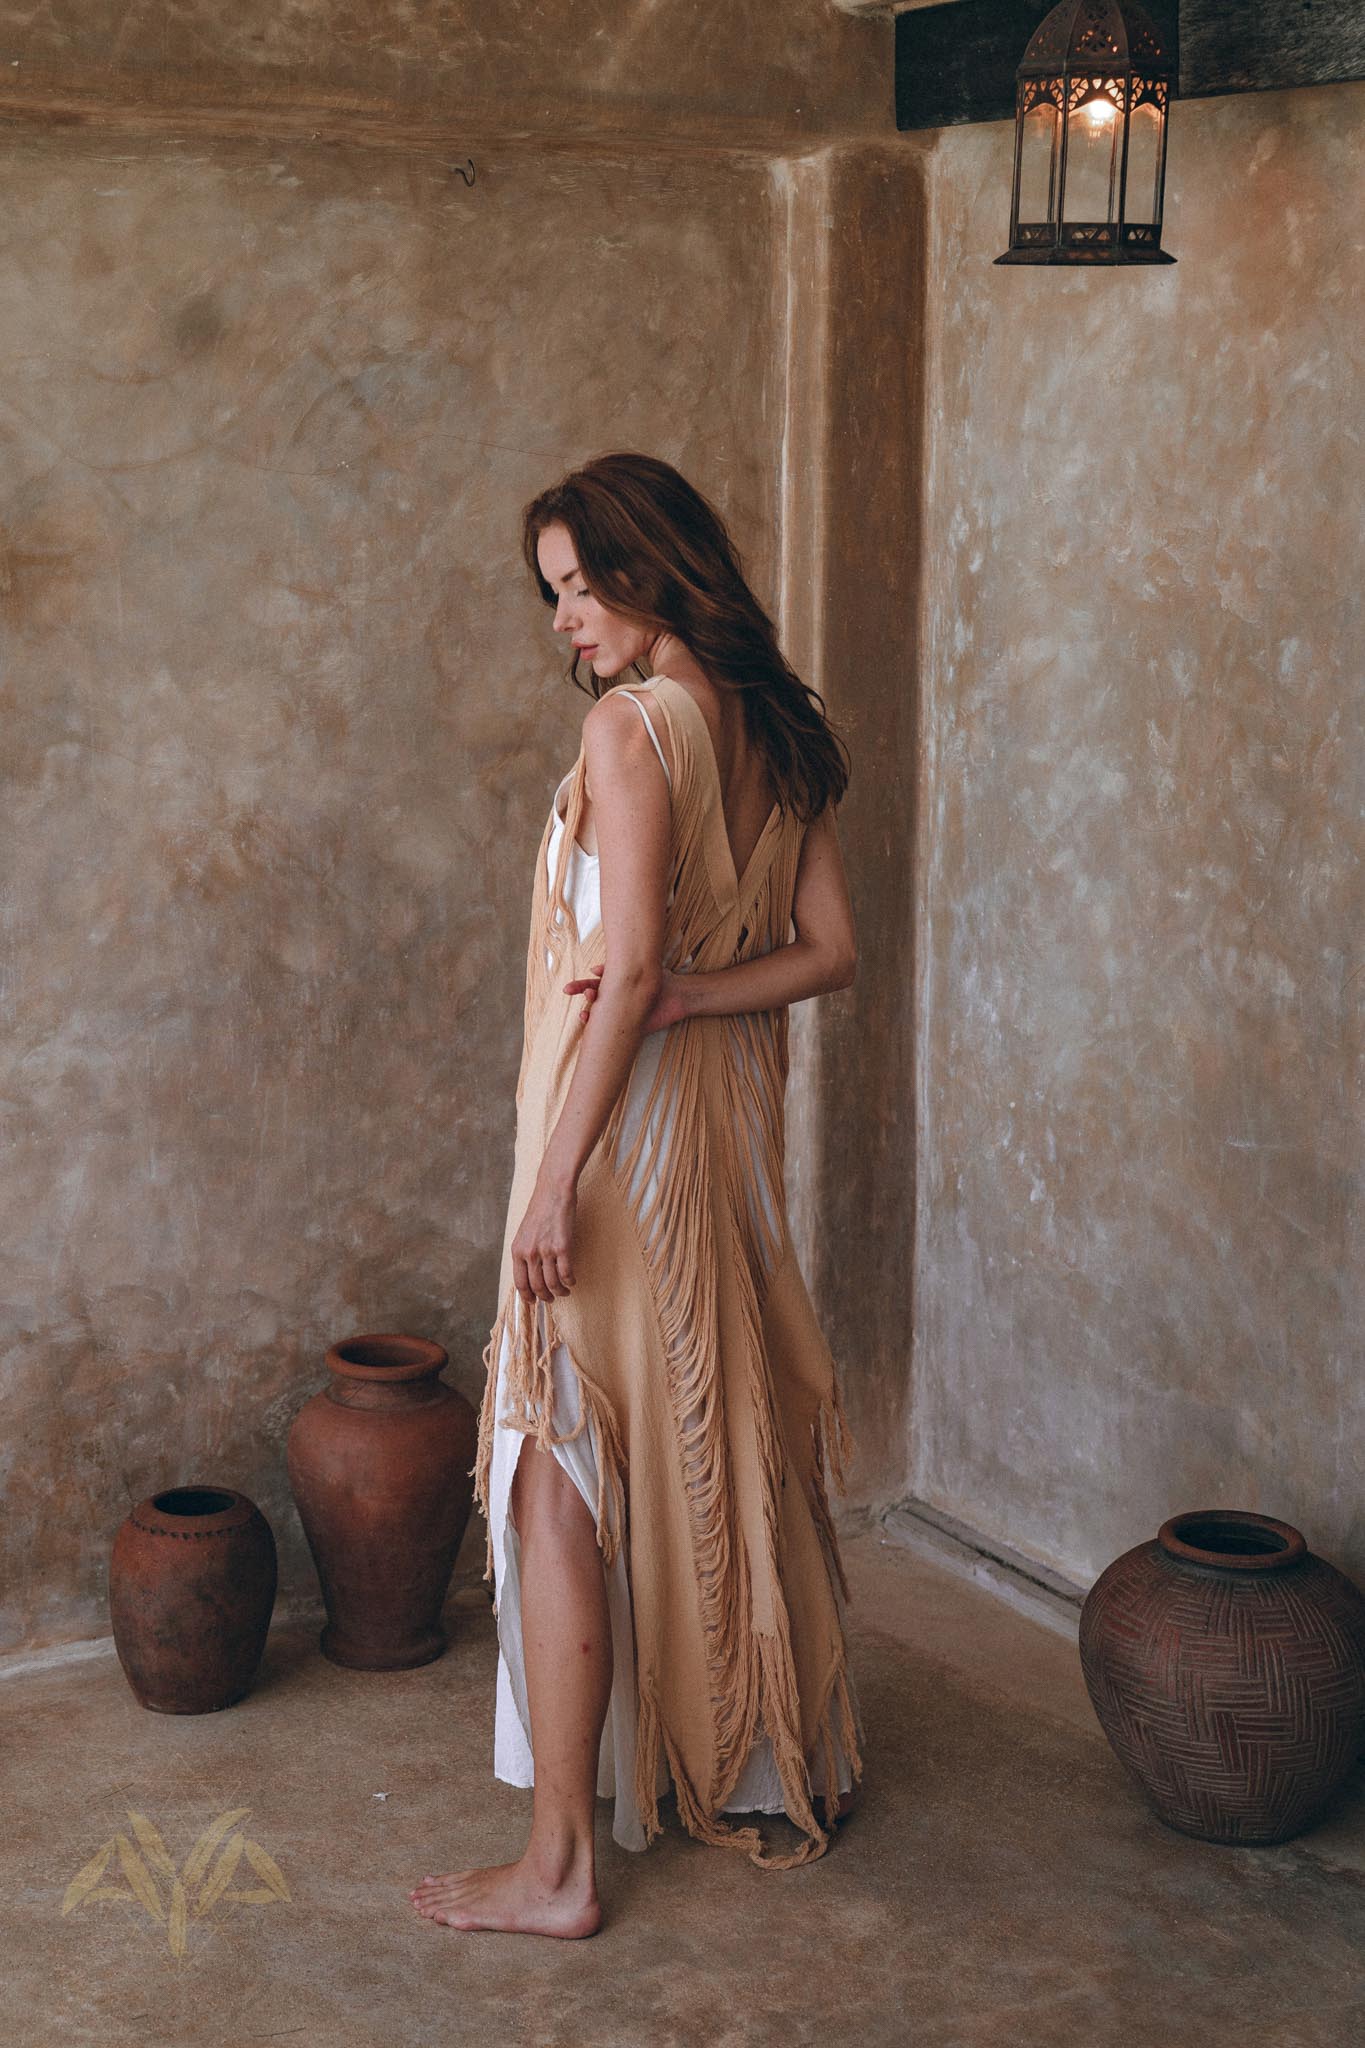 Add this beige ochre "Threads of Life" dress to your wardrobe for your favorite slip dress.